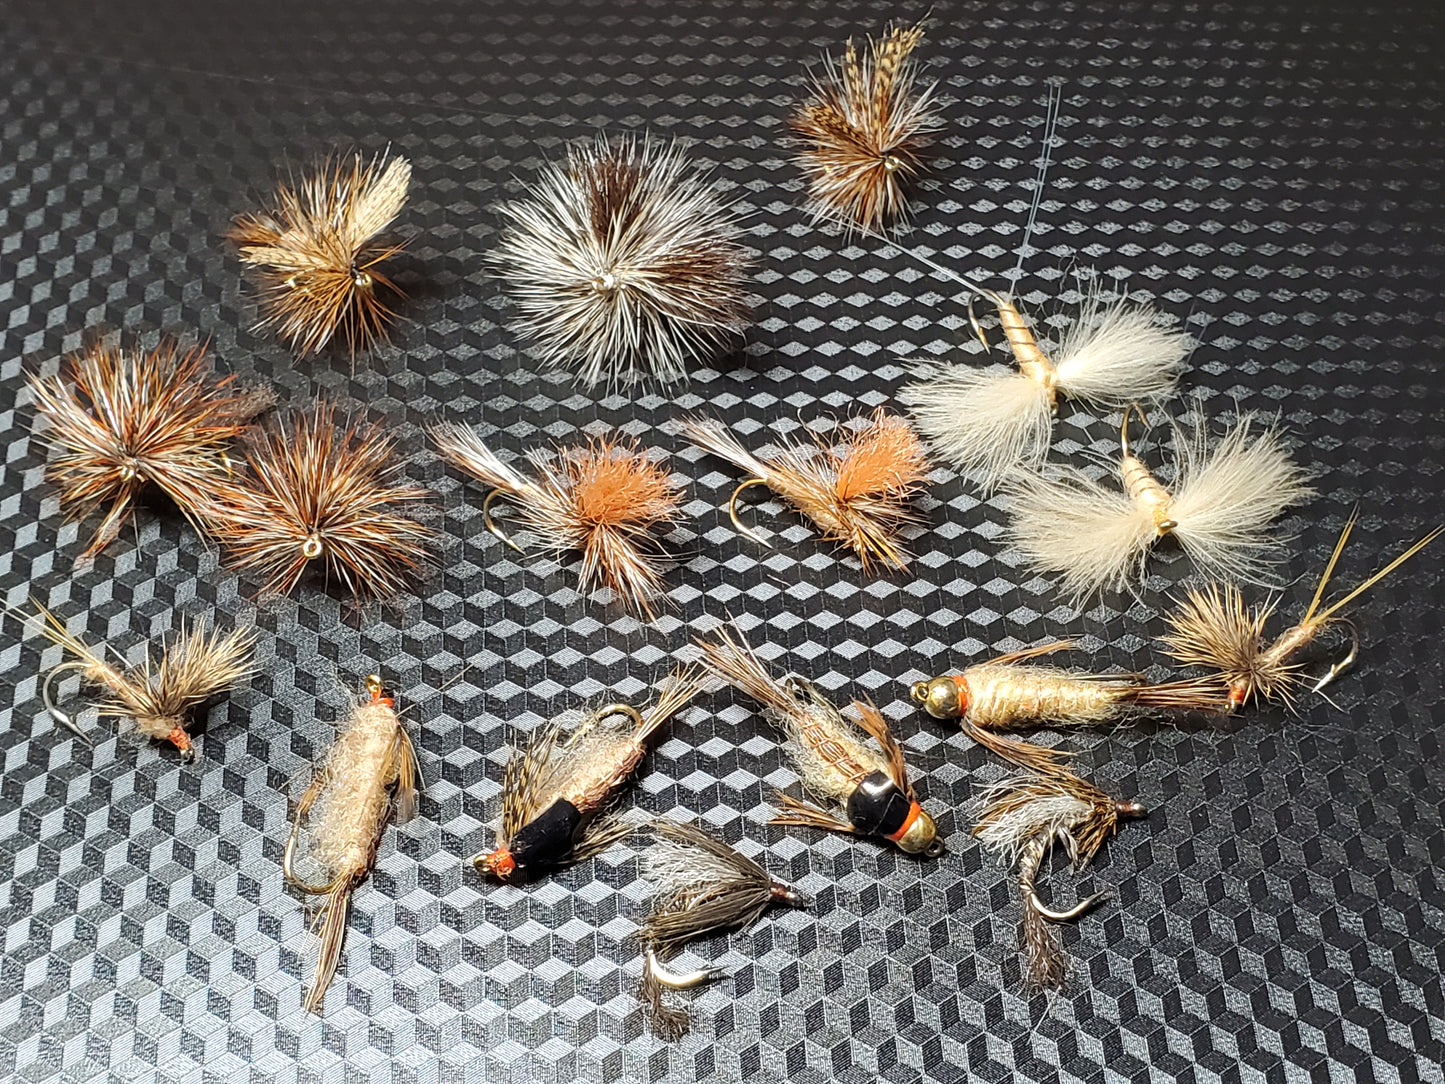 March Brown Life Cycle Selection, March Brown Nymph, March Brown Dry Fly, 17 March Brown Flies